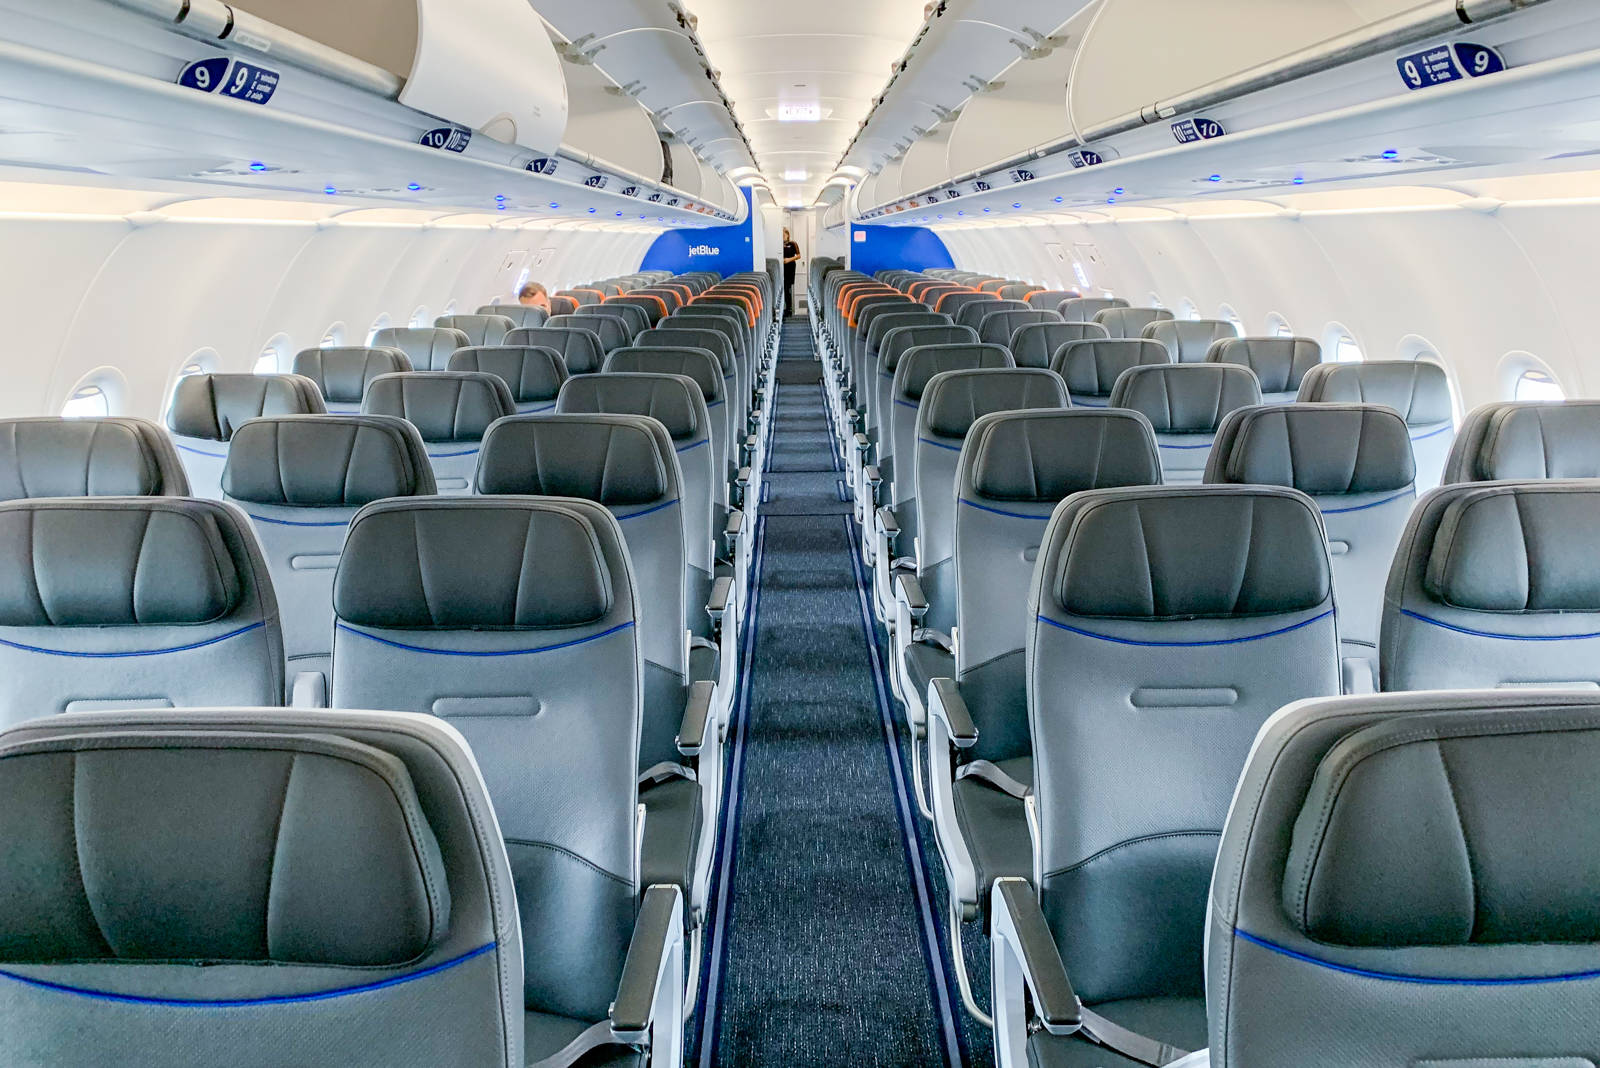 JetBlue extends seat-blocking policy one last time - The Points Guy